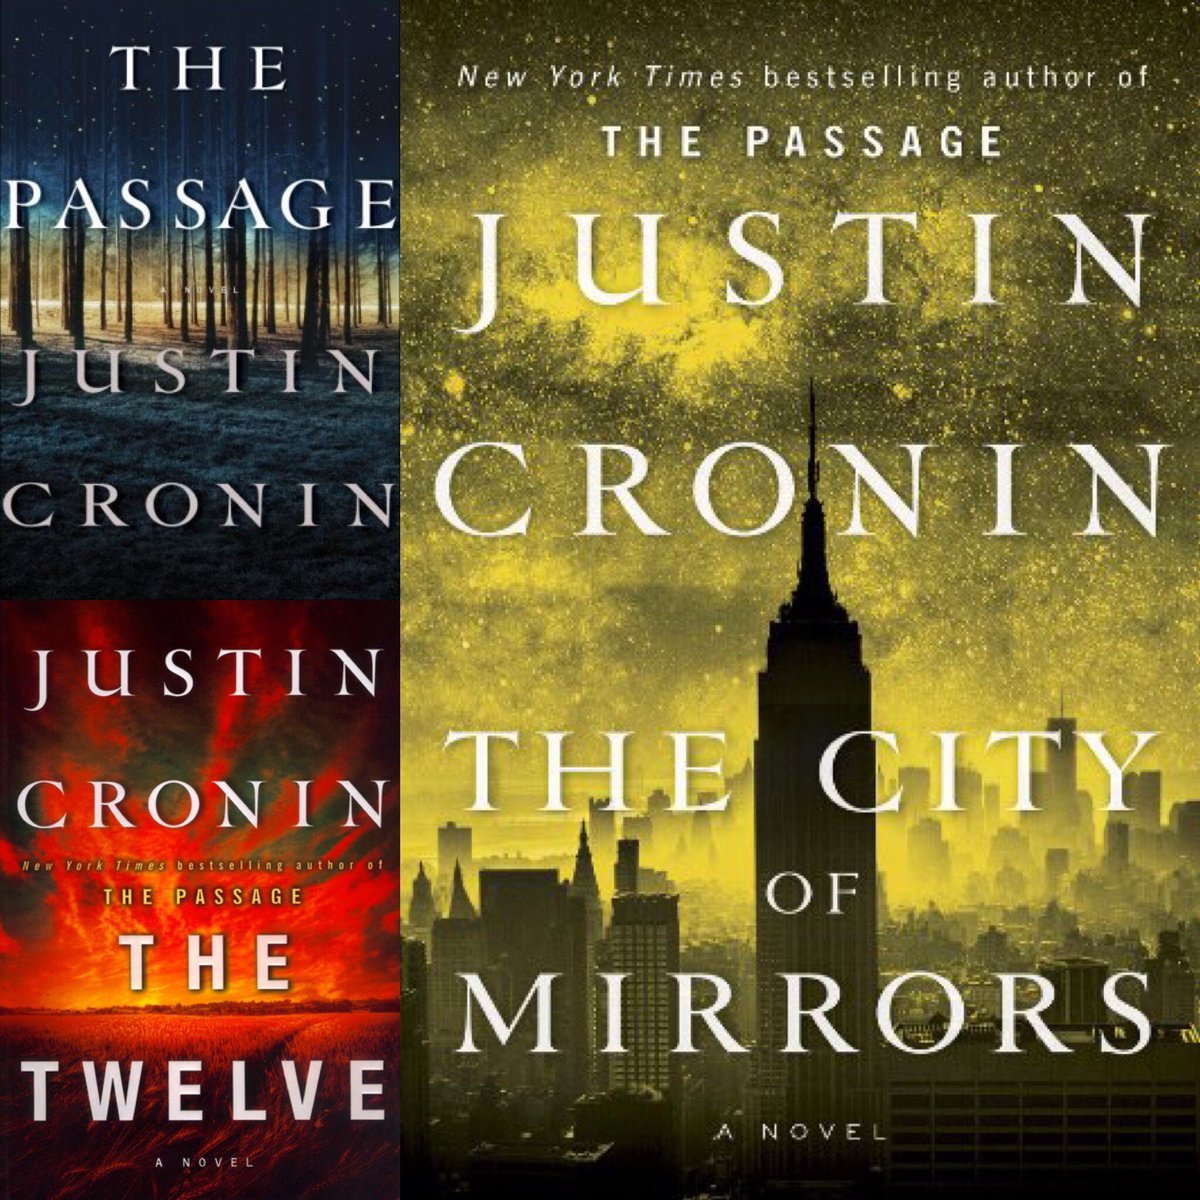 Only 1 more day till City of Mirrors is released! #cityofmirrors #justincronin #finalbook @jccronin Justin Cronin